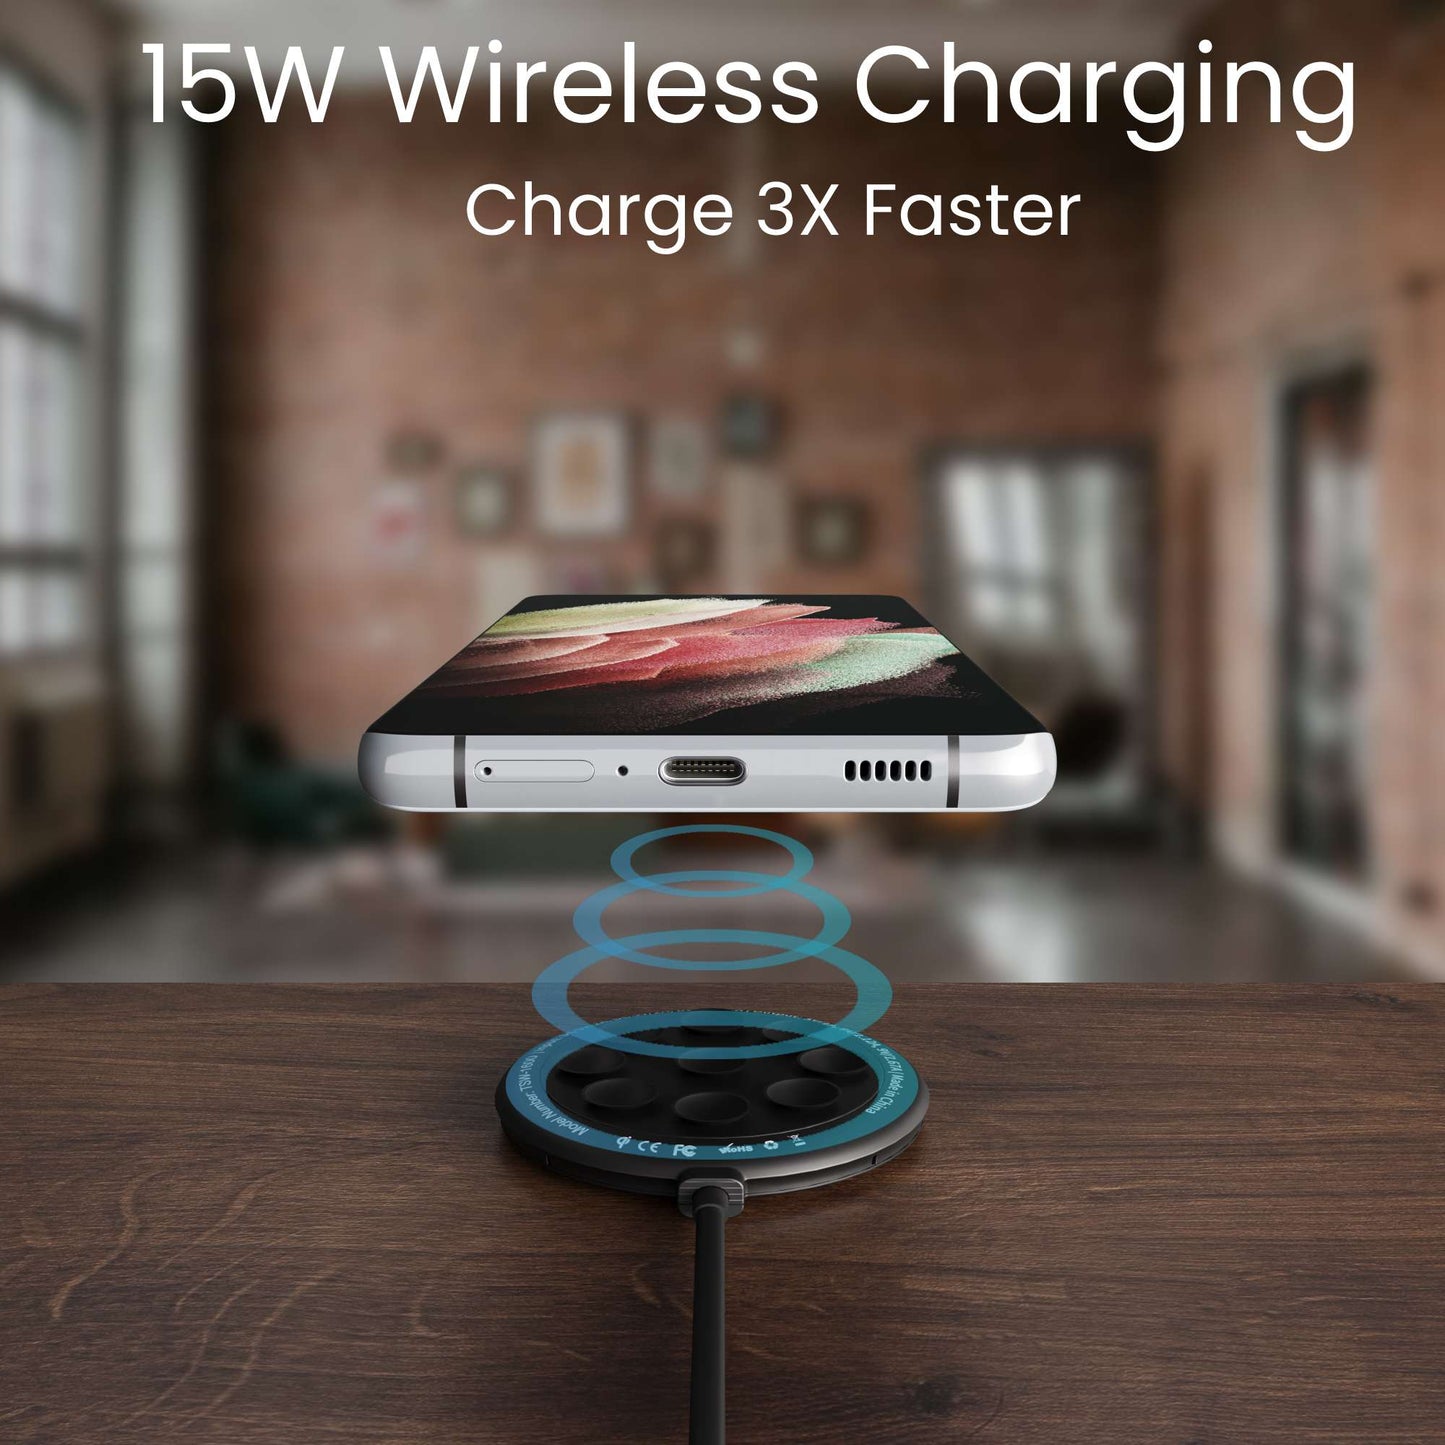 TSWireless 15W Charger Pad Suction - TechsmarterTechsmarterWireless Charger